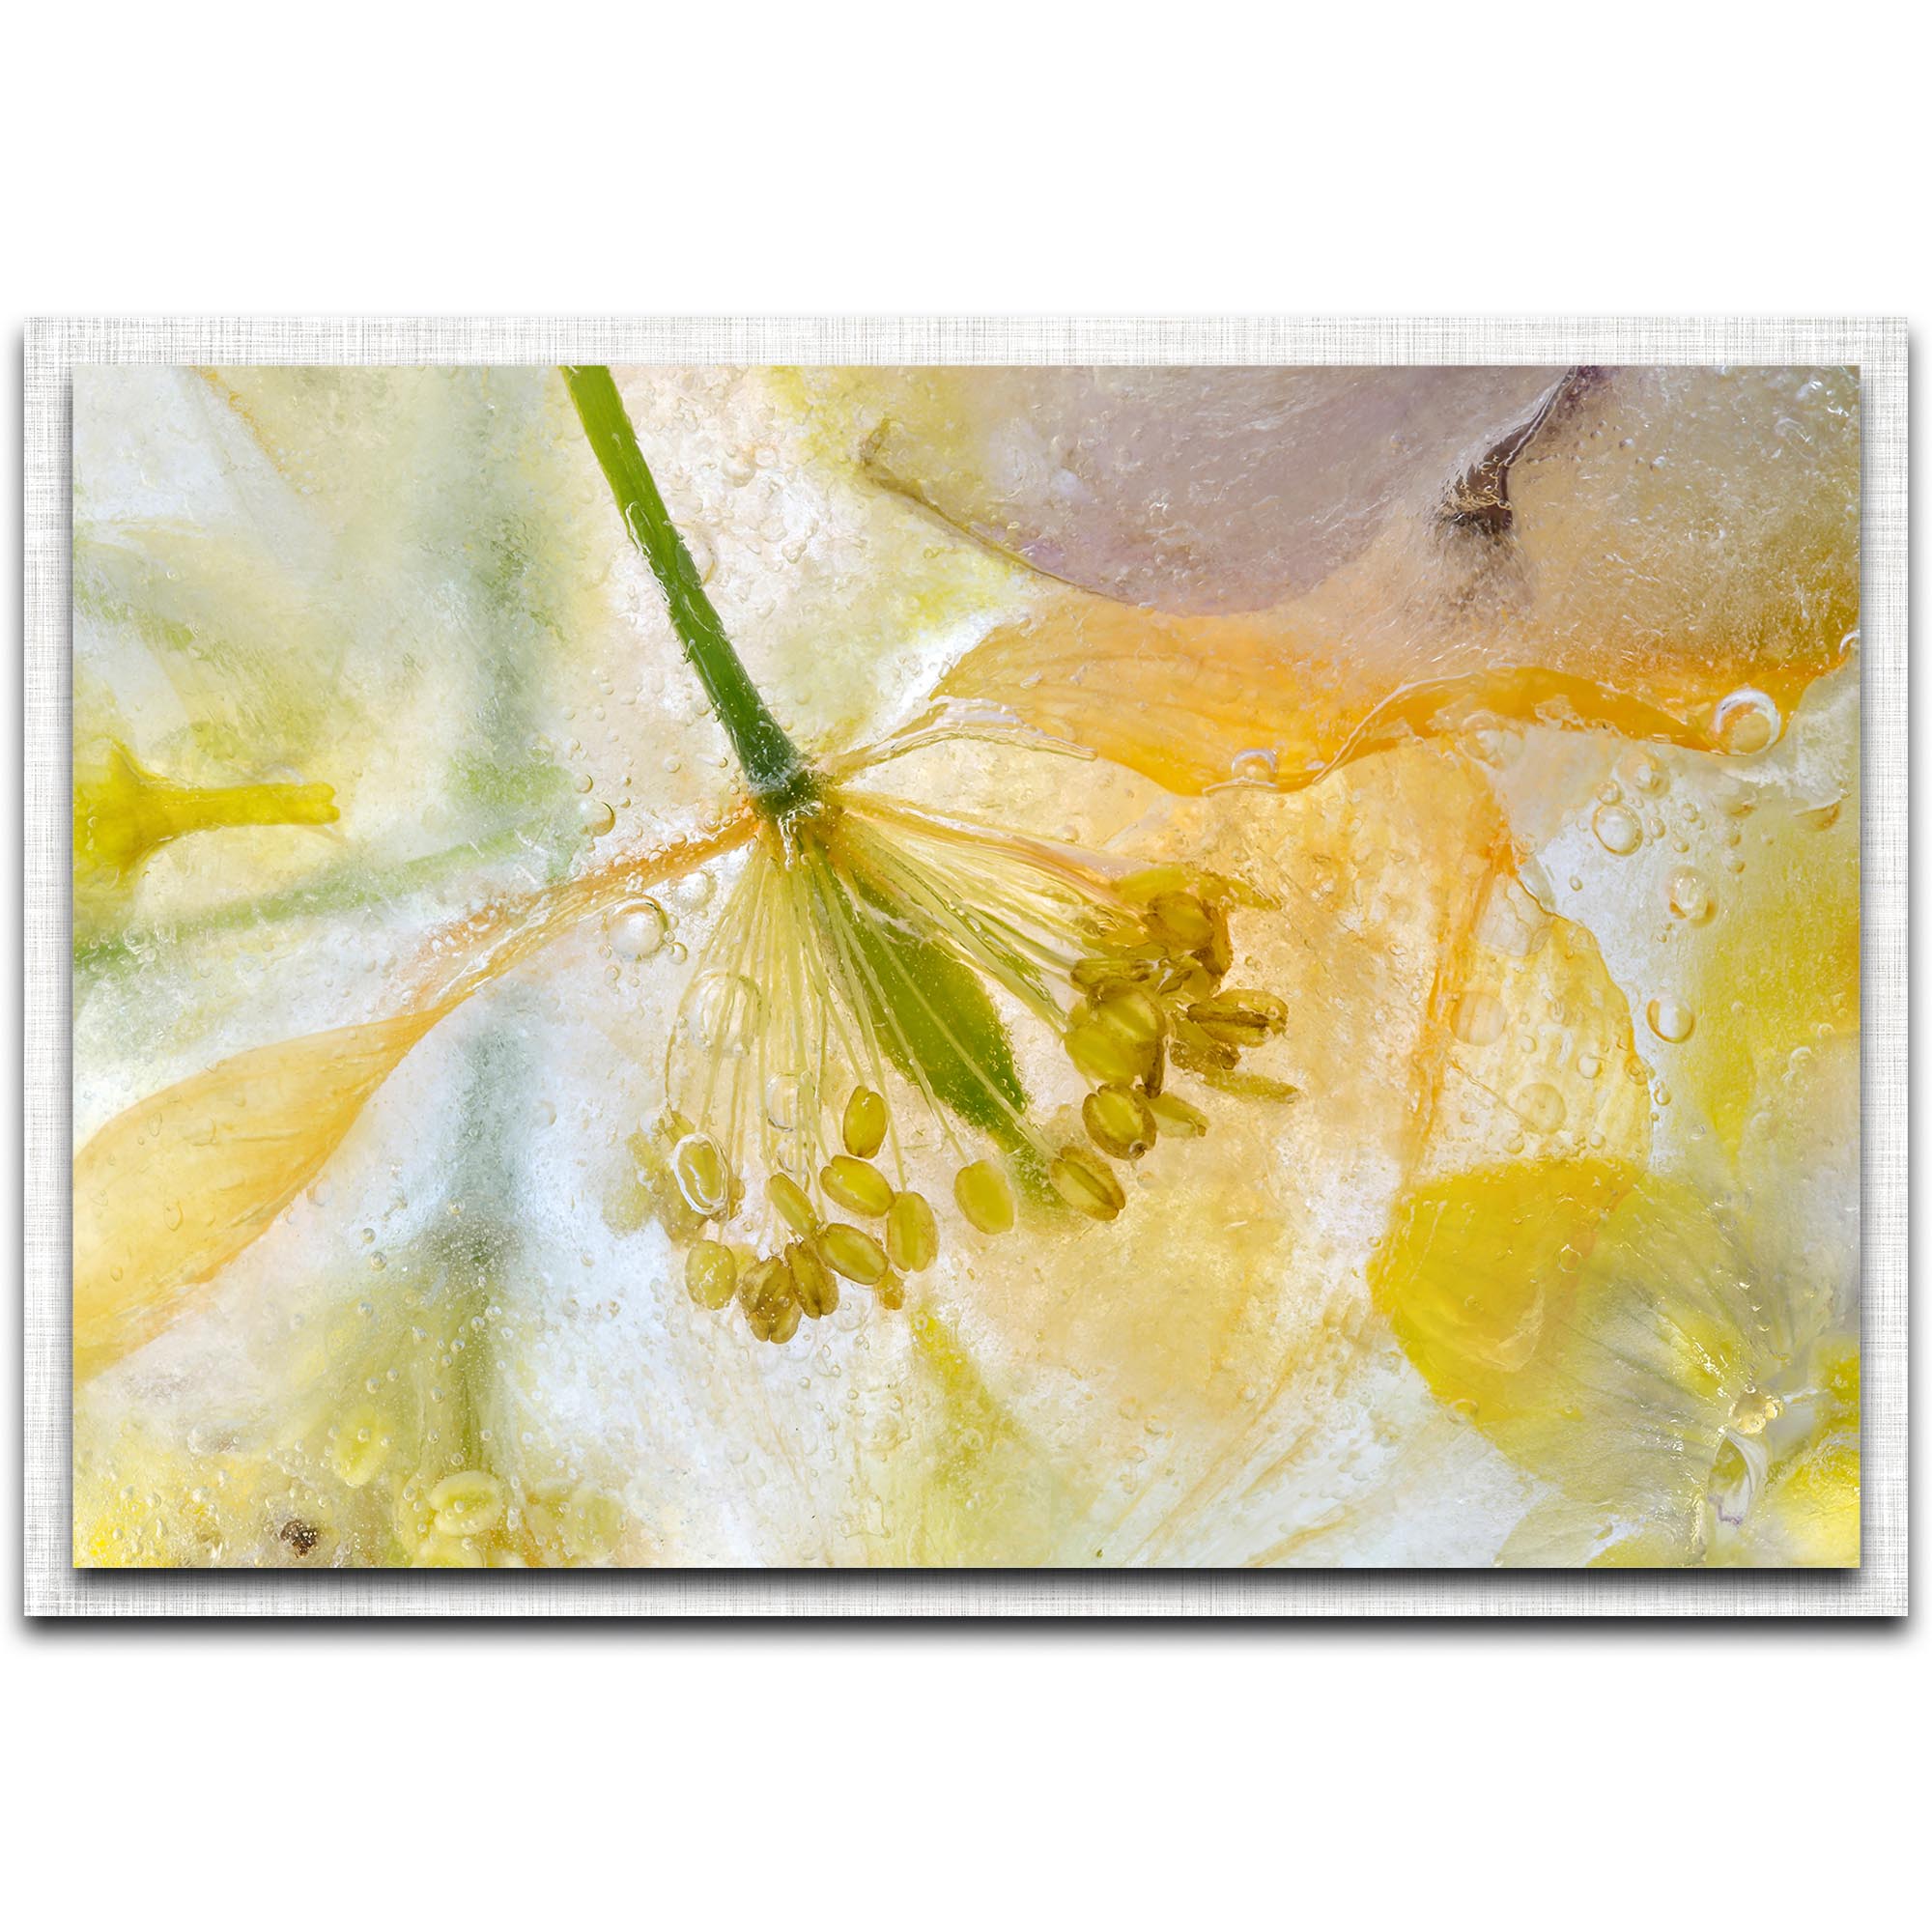 Mandy Disher 'Papaver Ice' 32in x 22in Modern Farmhouse Floral on Metal